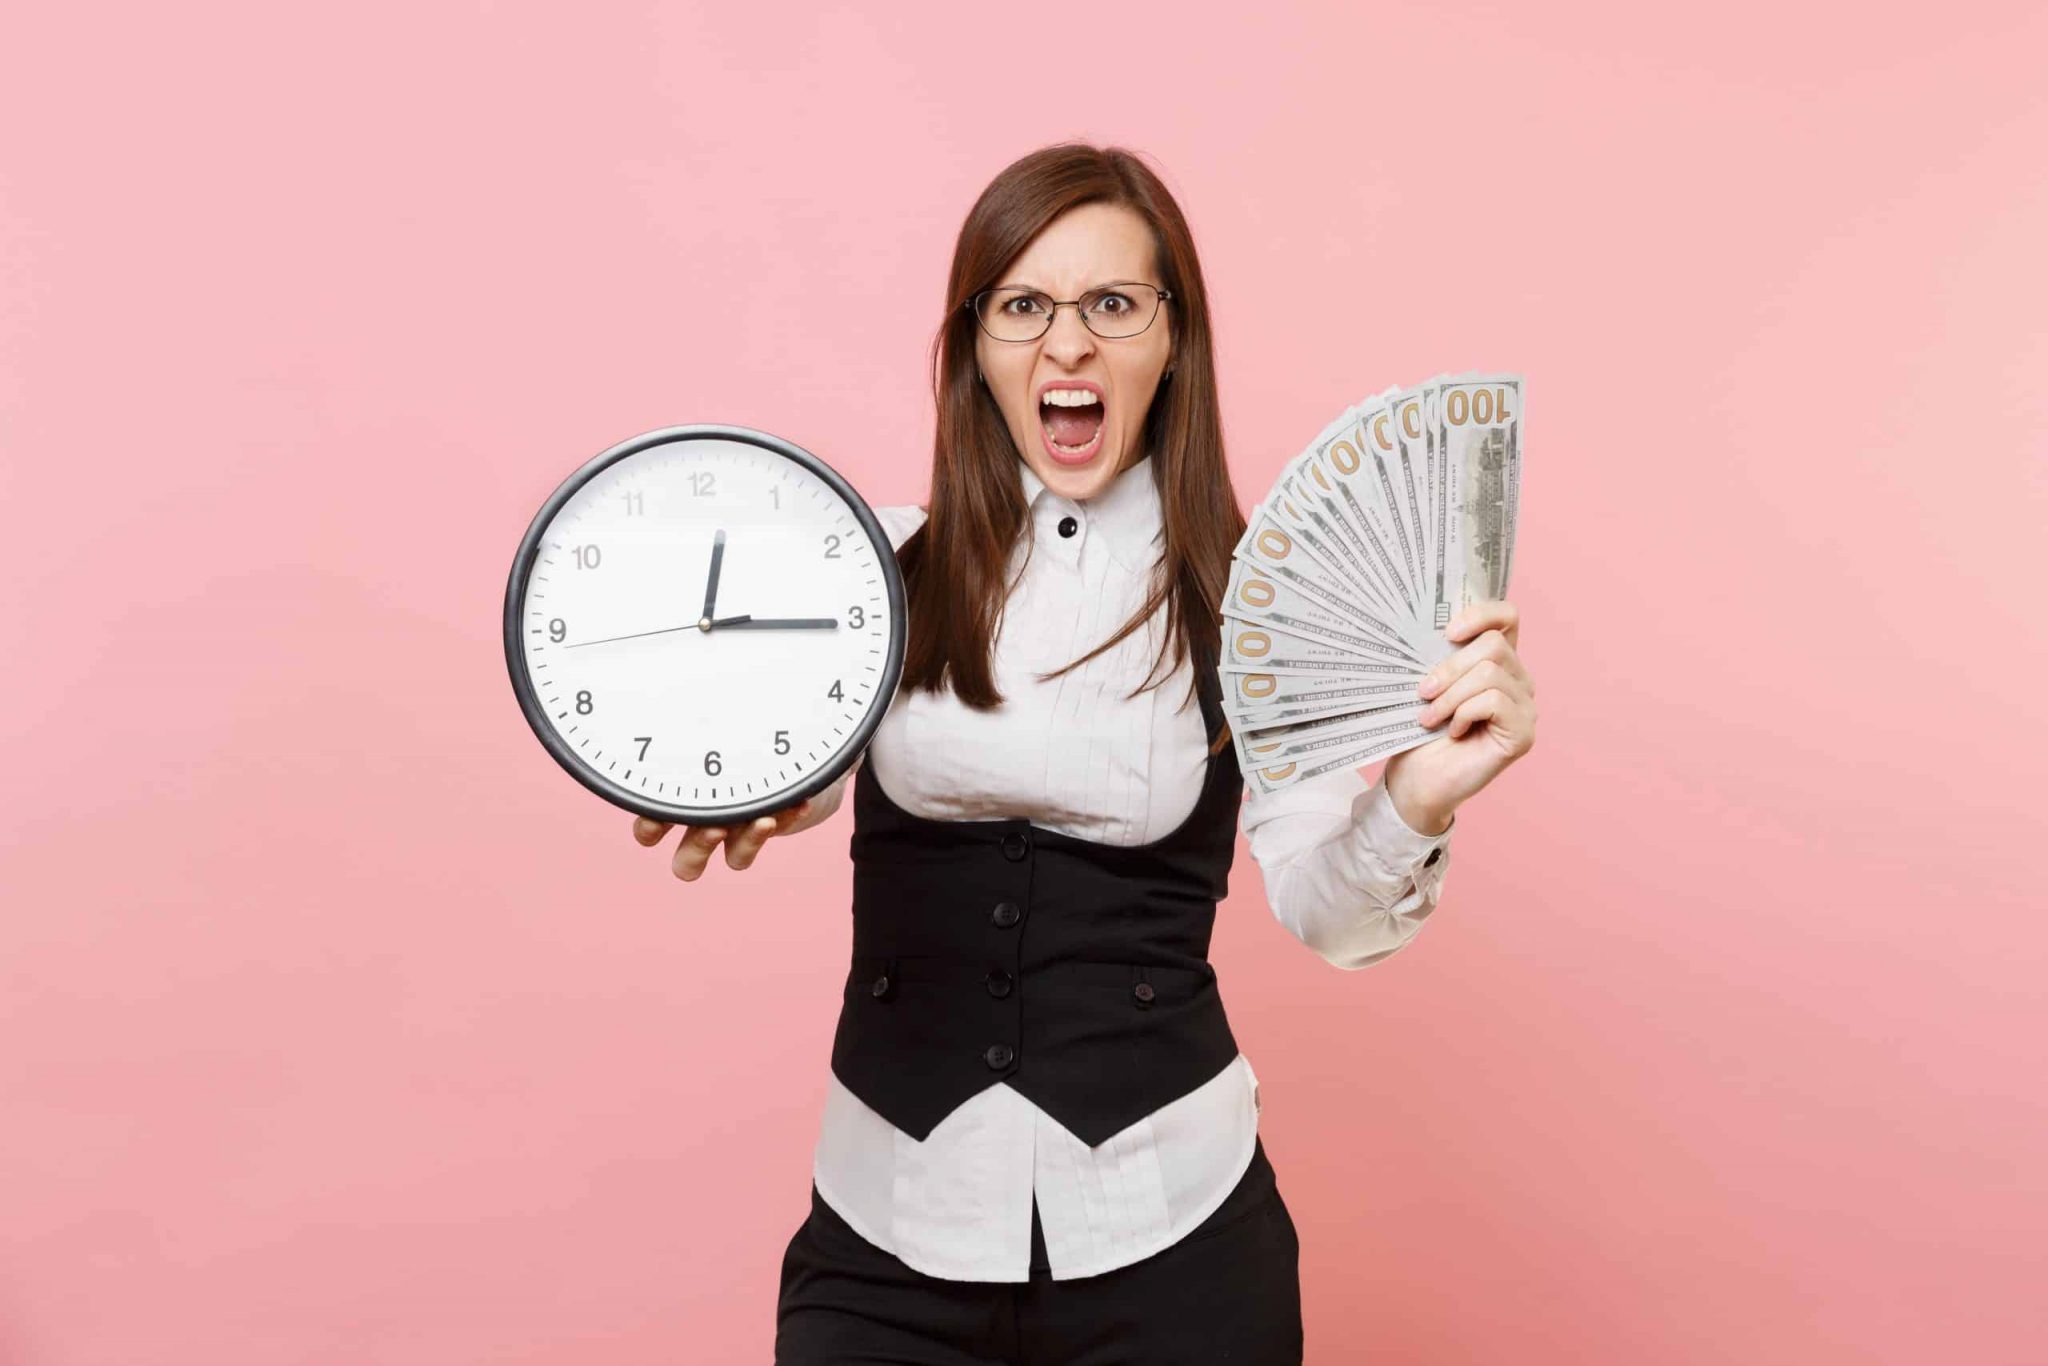 young irritated business woman glasses scream hold bundle lots dollars cash money alarm clock isolated pink background lady boss achievement career wealth copy space advertisement min